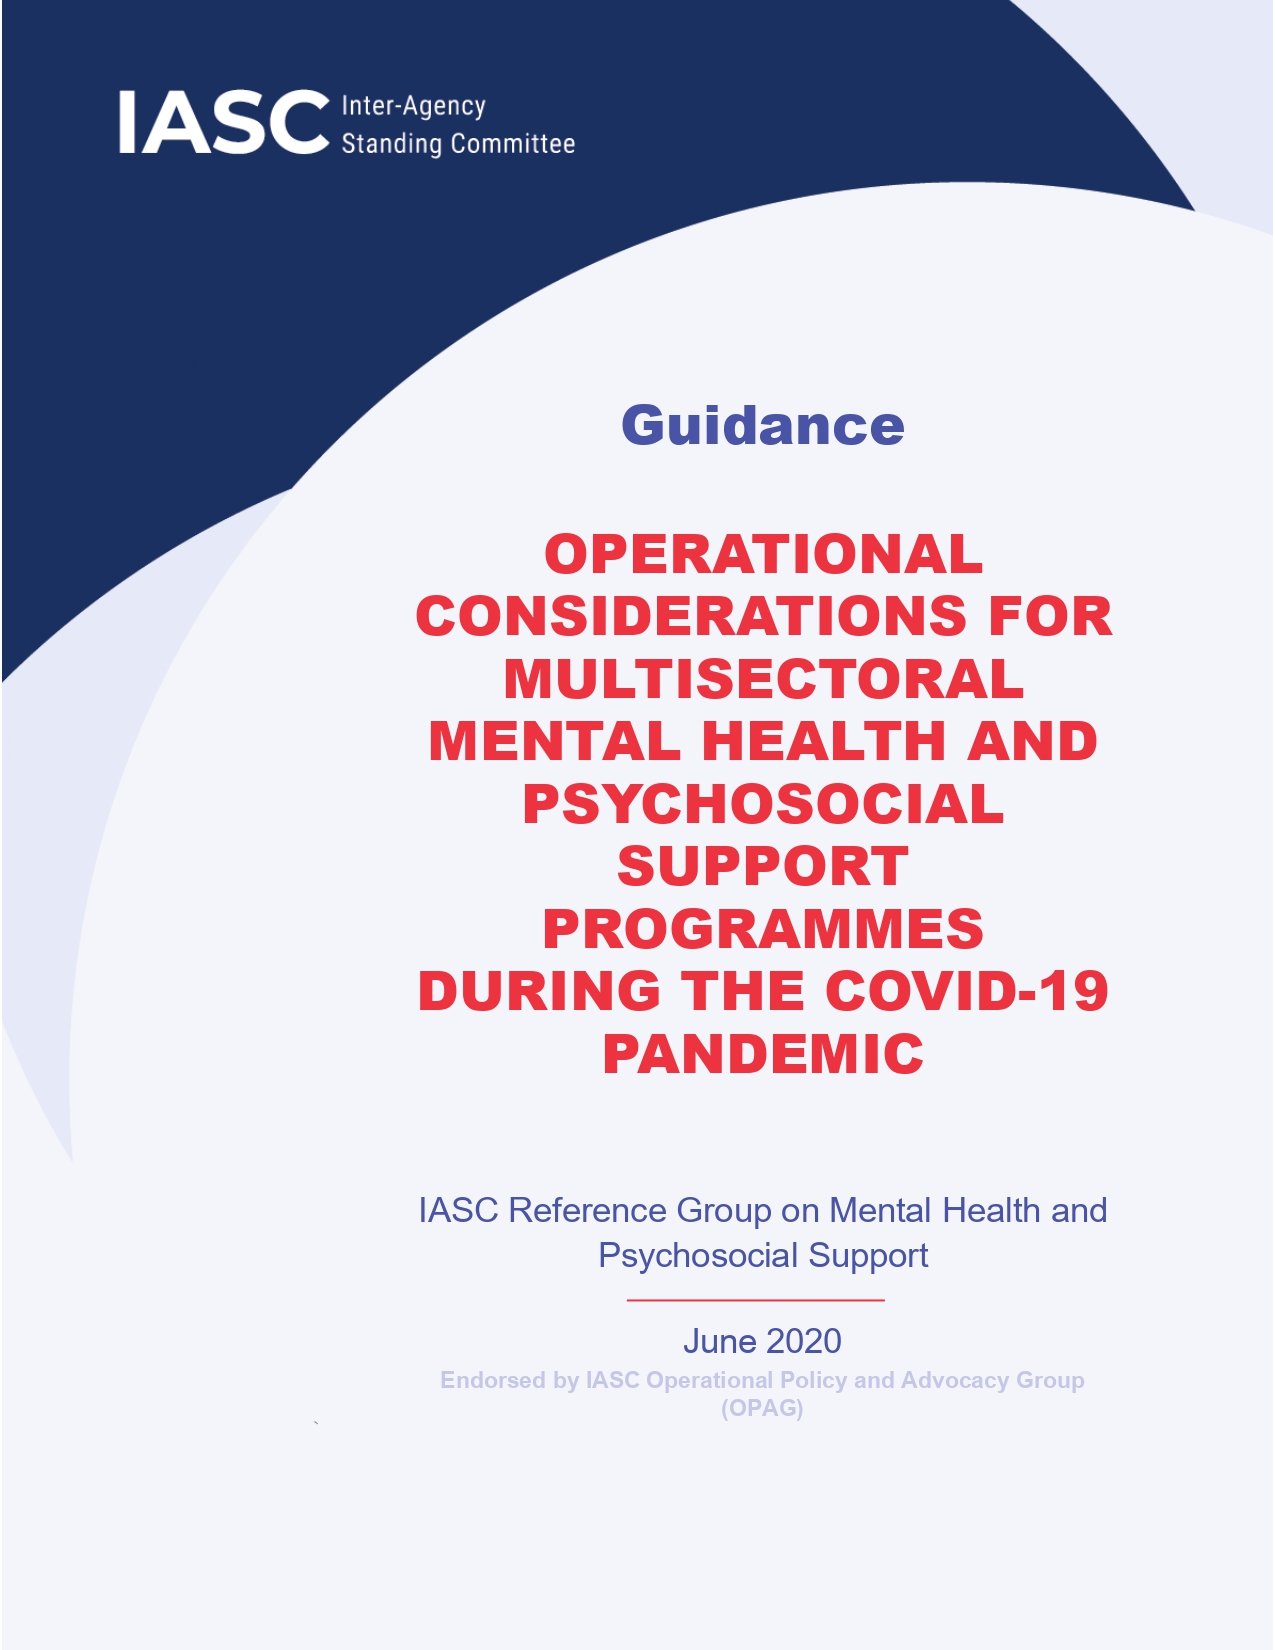 Guidance OPERATIONAL CONSIDERATIONS FOR MULTISECTORAL MENTAL HEALTH AND PSYCHOSOCIAL SUPPORT PROGRAMMES DURING THE COVID-19 PANDEMIC